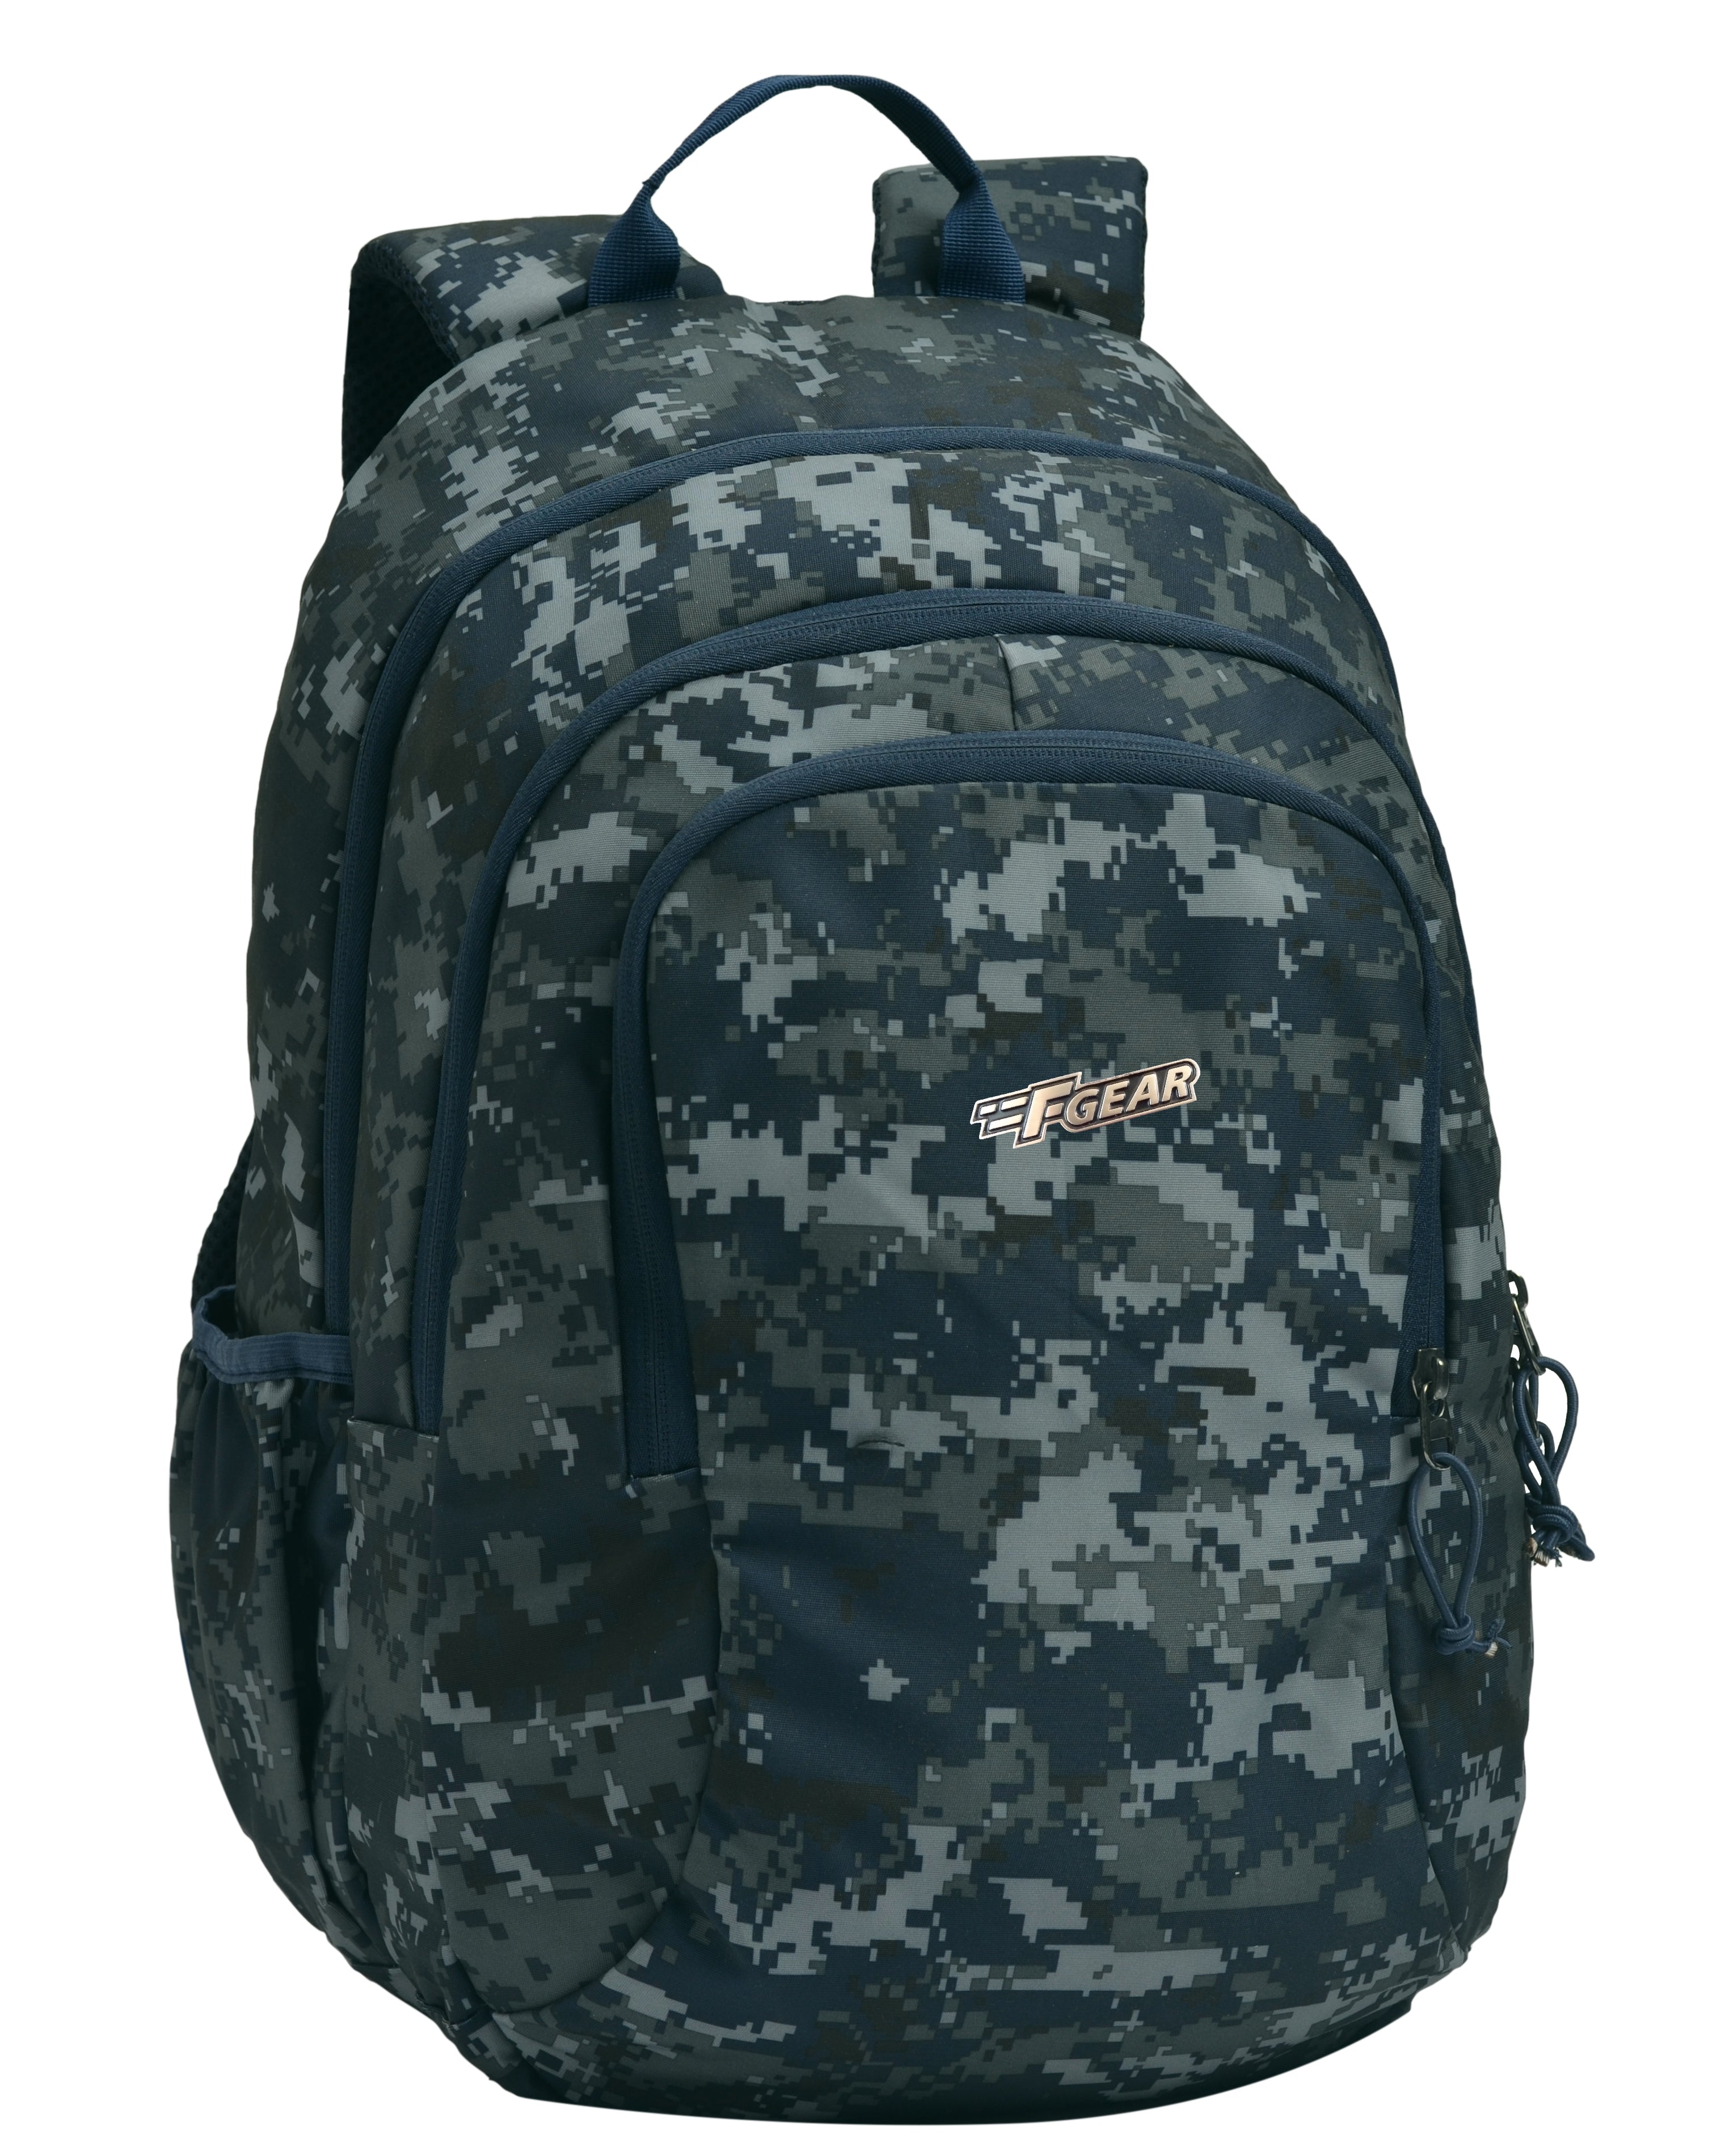 Unisex Military Backpack Camouflage + Military Green Campomaggi | Pier